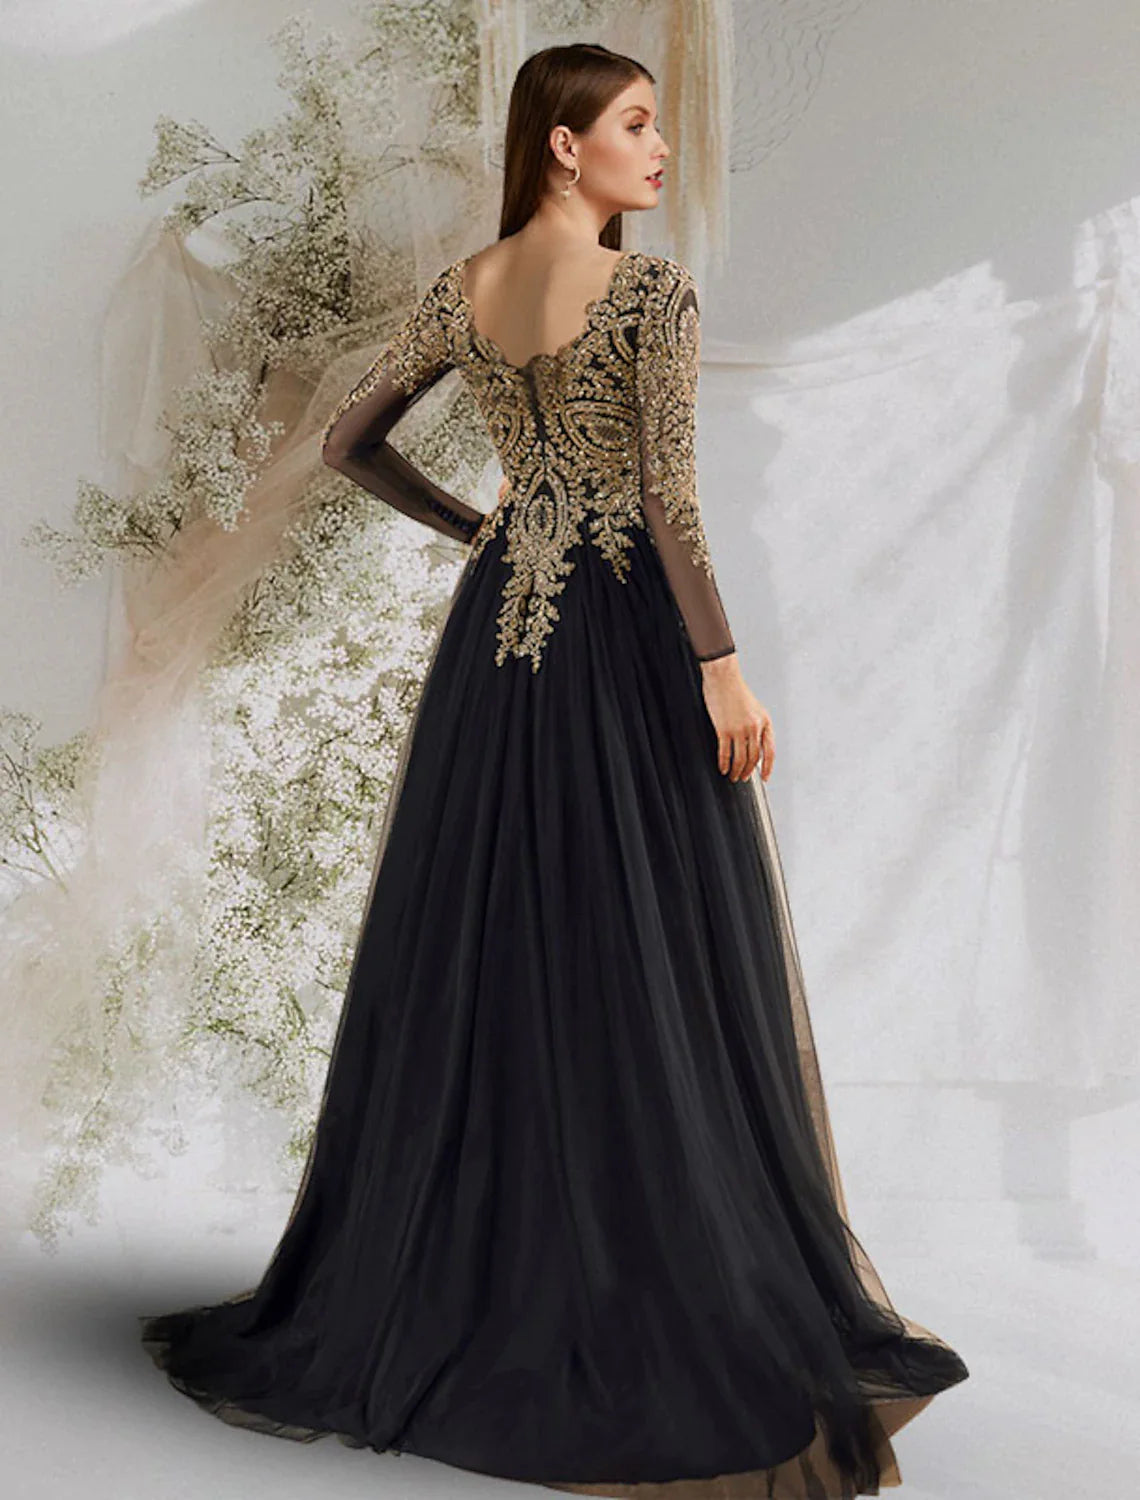 Ball Gown Luxurious Elegant Prom Formal Evening Dress V Neck Long Sleeve Floor Length Tulle with Sequin Appliques